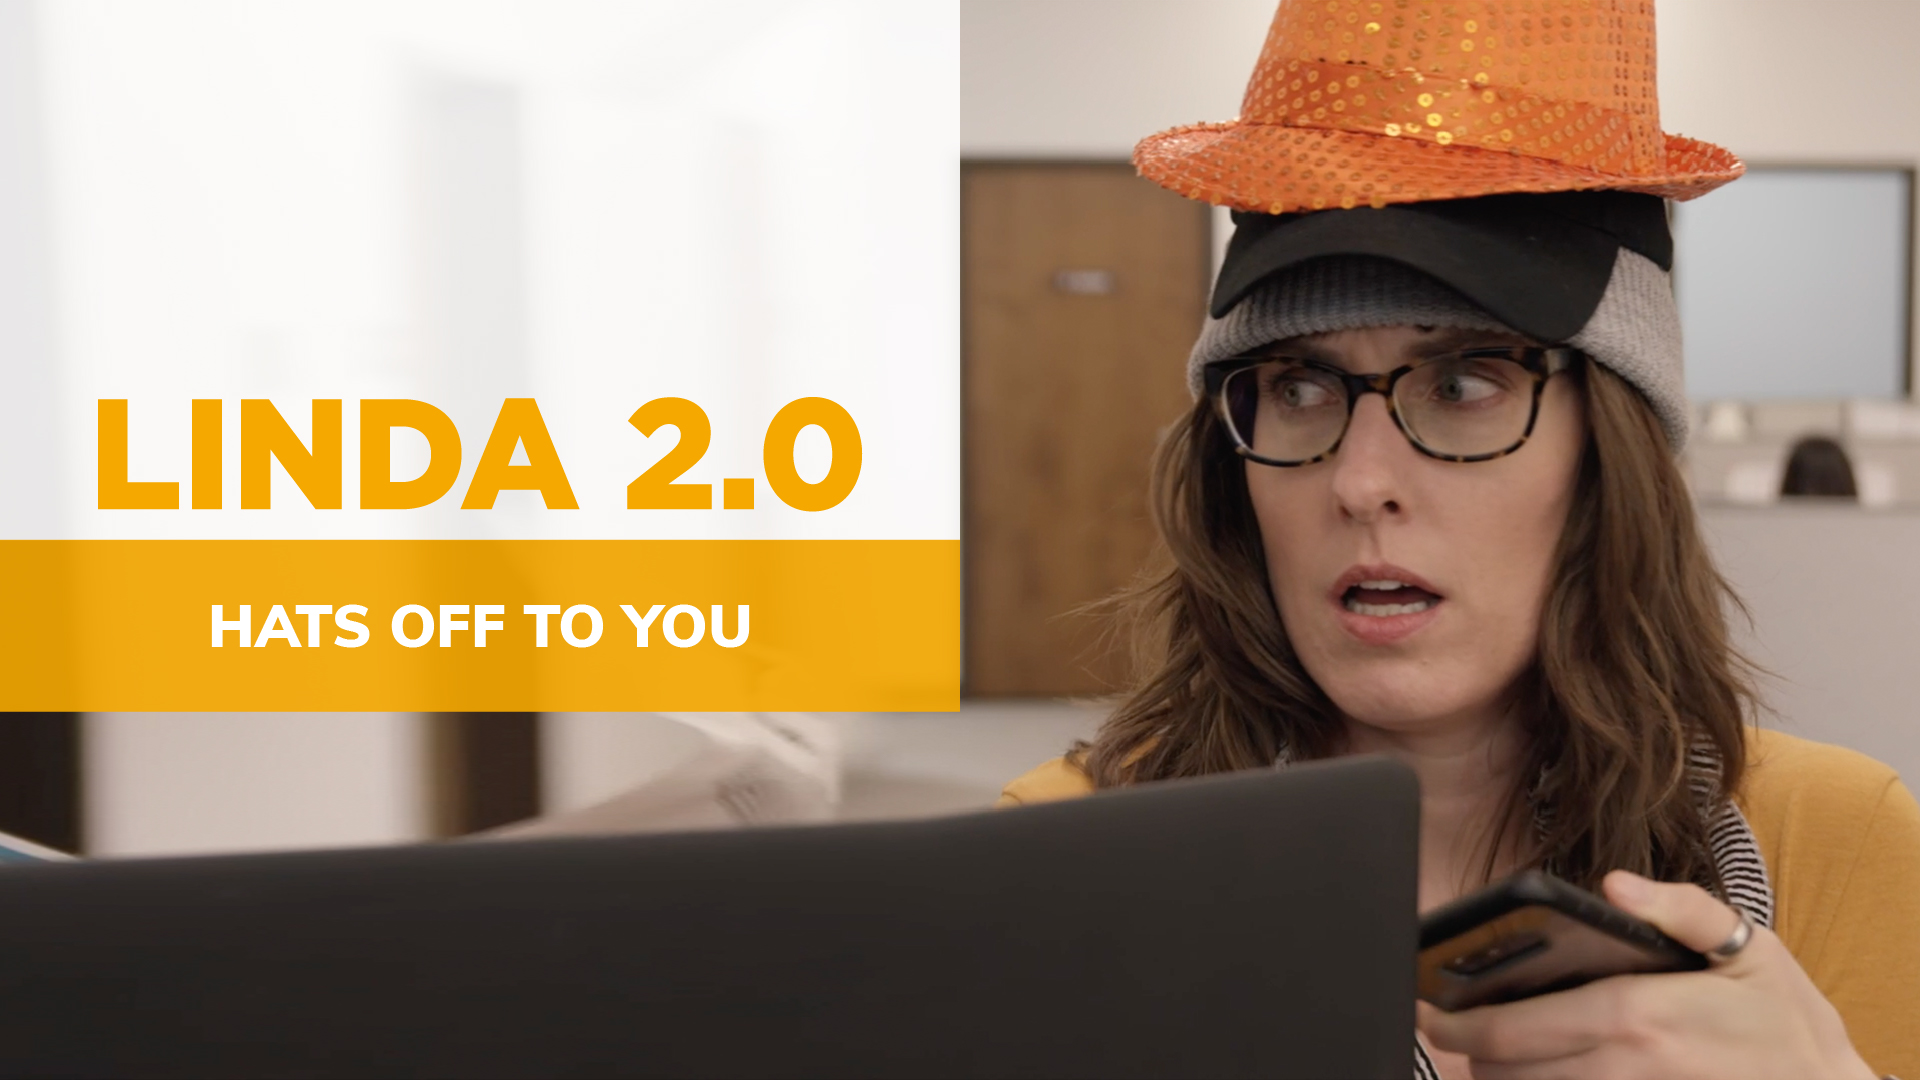 Don't Limit Linda: Hats Off to You [VIDEO]